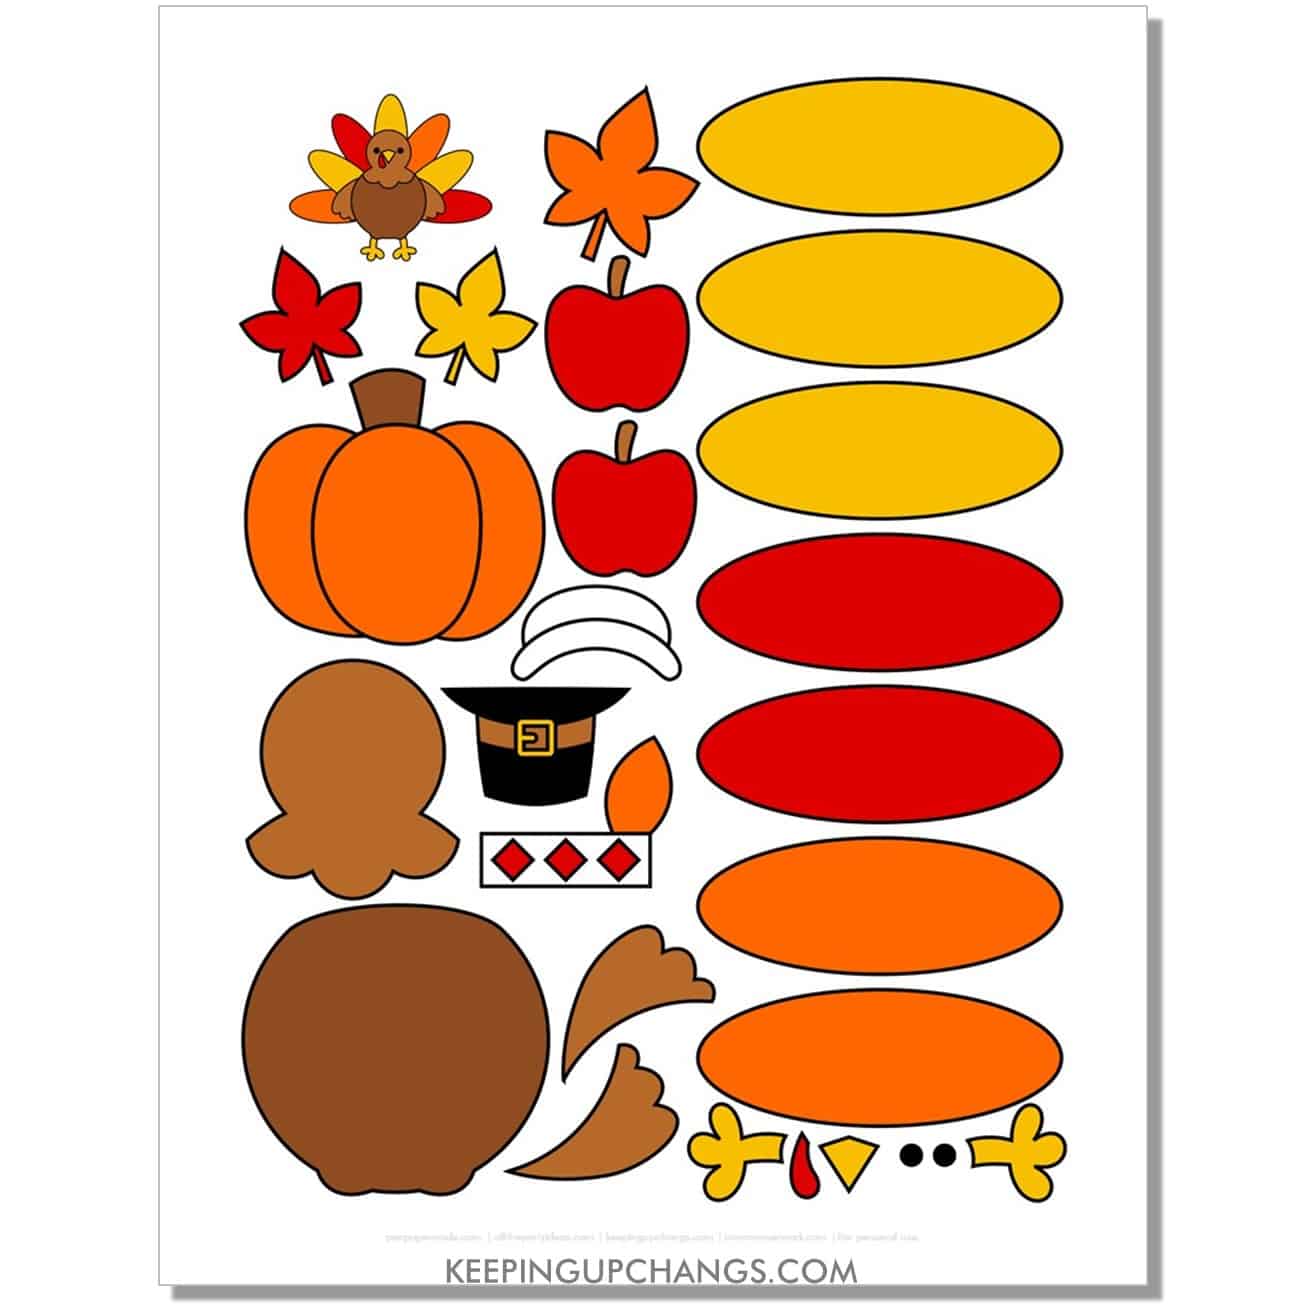 easy build a turkey template for kindergarten with feathers, body, hat, accessories in color.